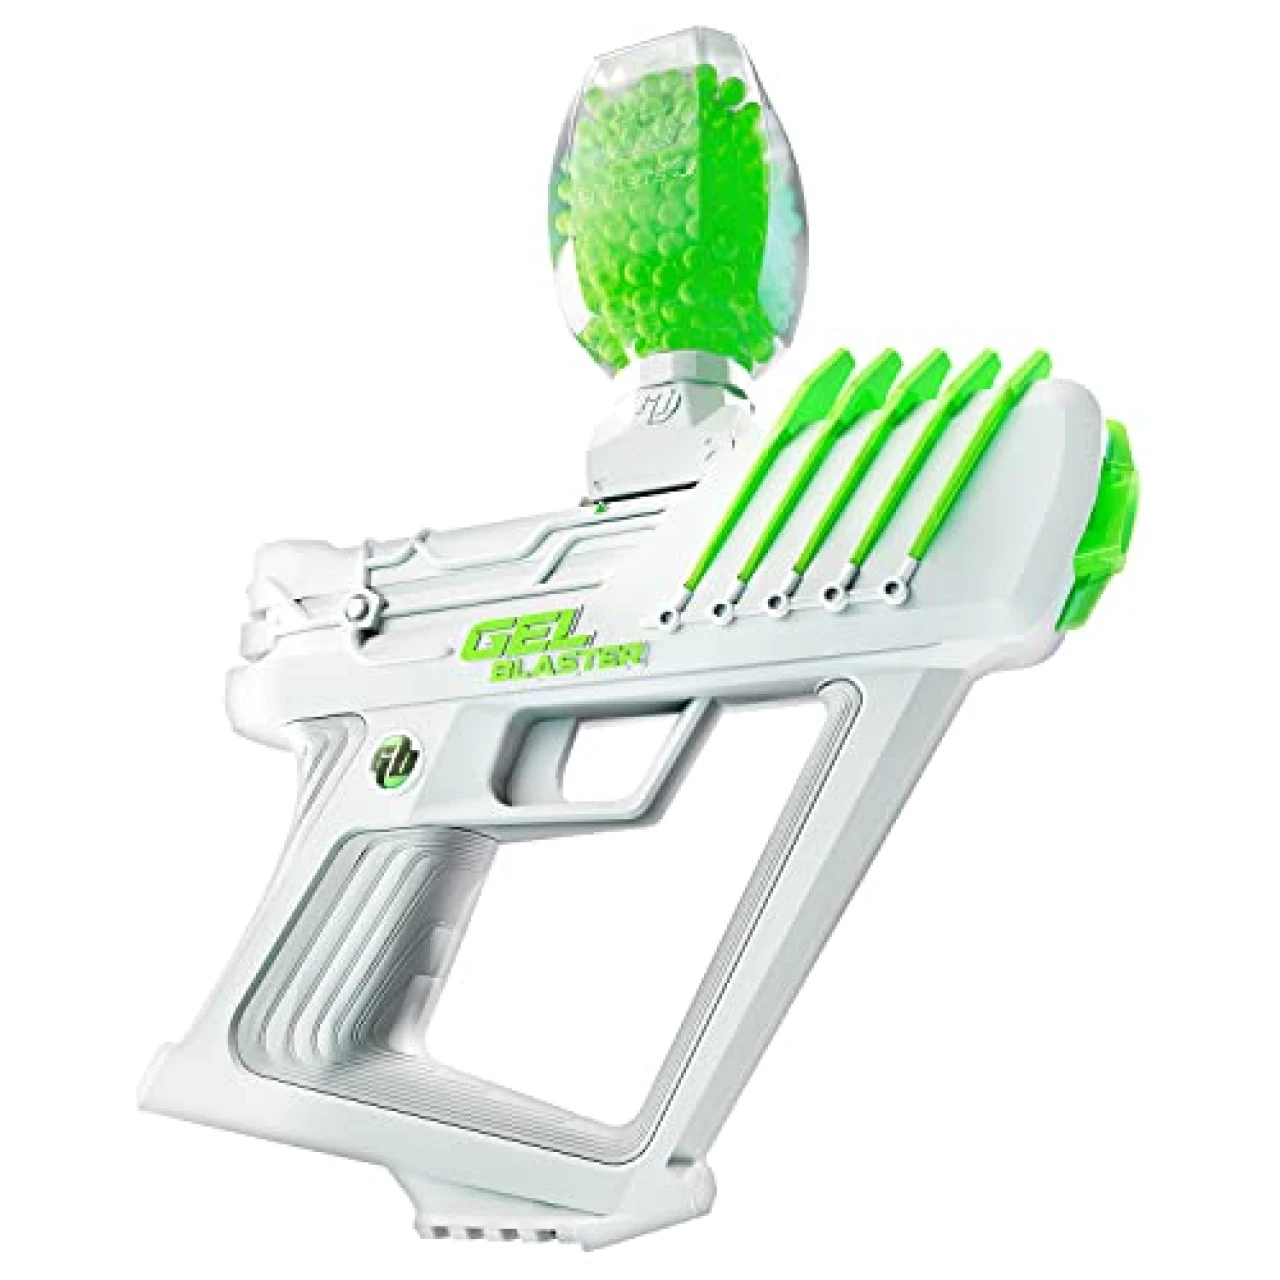 The Original Gel Blaster Surge - Extended 100+ Foot Range - Fast &amp; Powerful 170 FPS - Semi &amp; Automatic Modes - Kit Includes Fast Charger &amp; More - Ages 14+